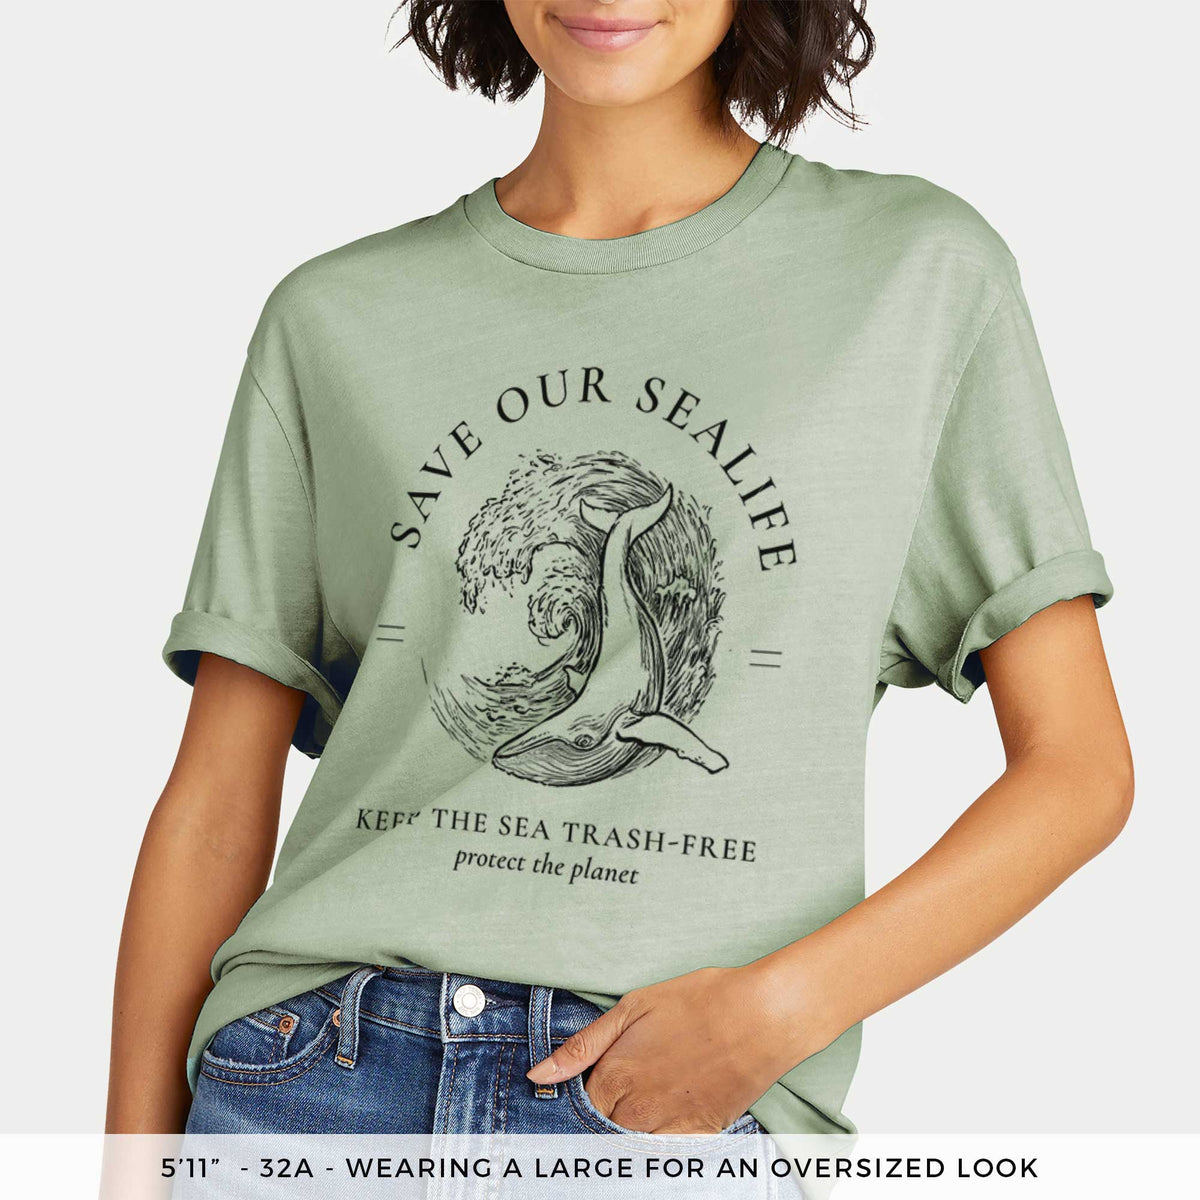 Save our Sealife - Keep the Sea Trash-Free -  Mineral Wash 100% Organic Cotton Short Sleeve